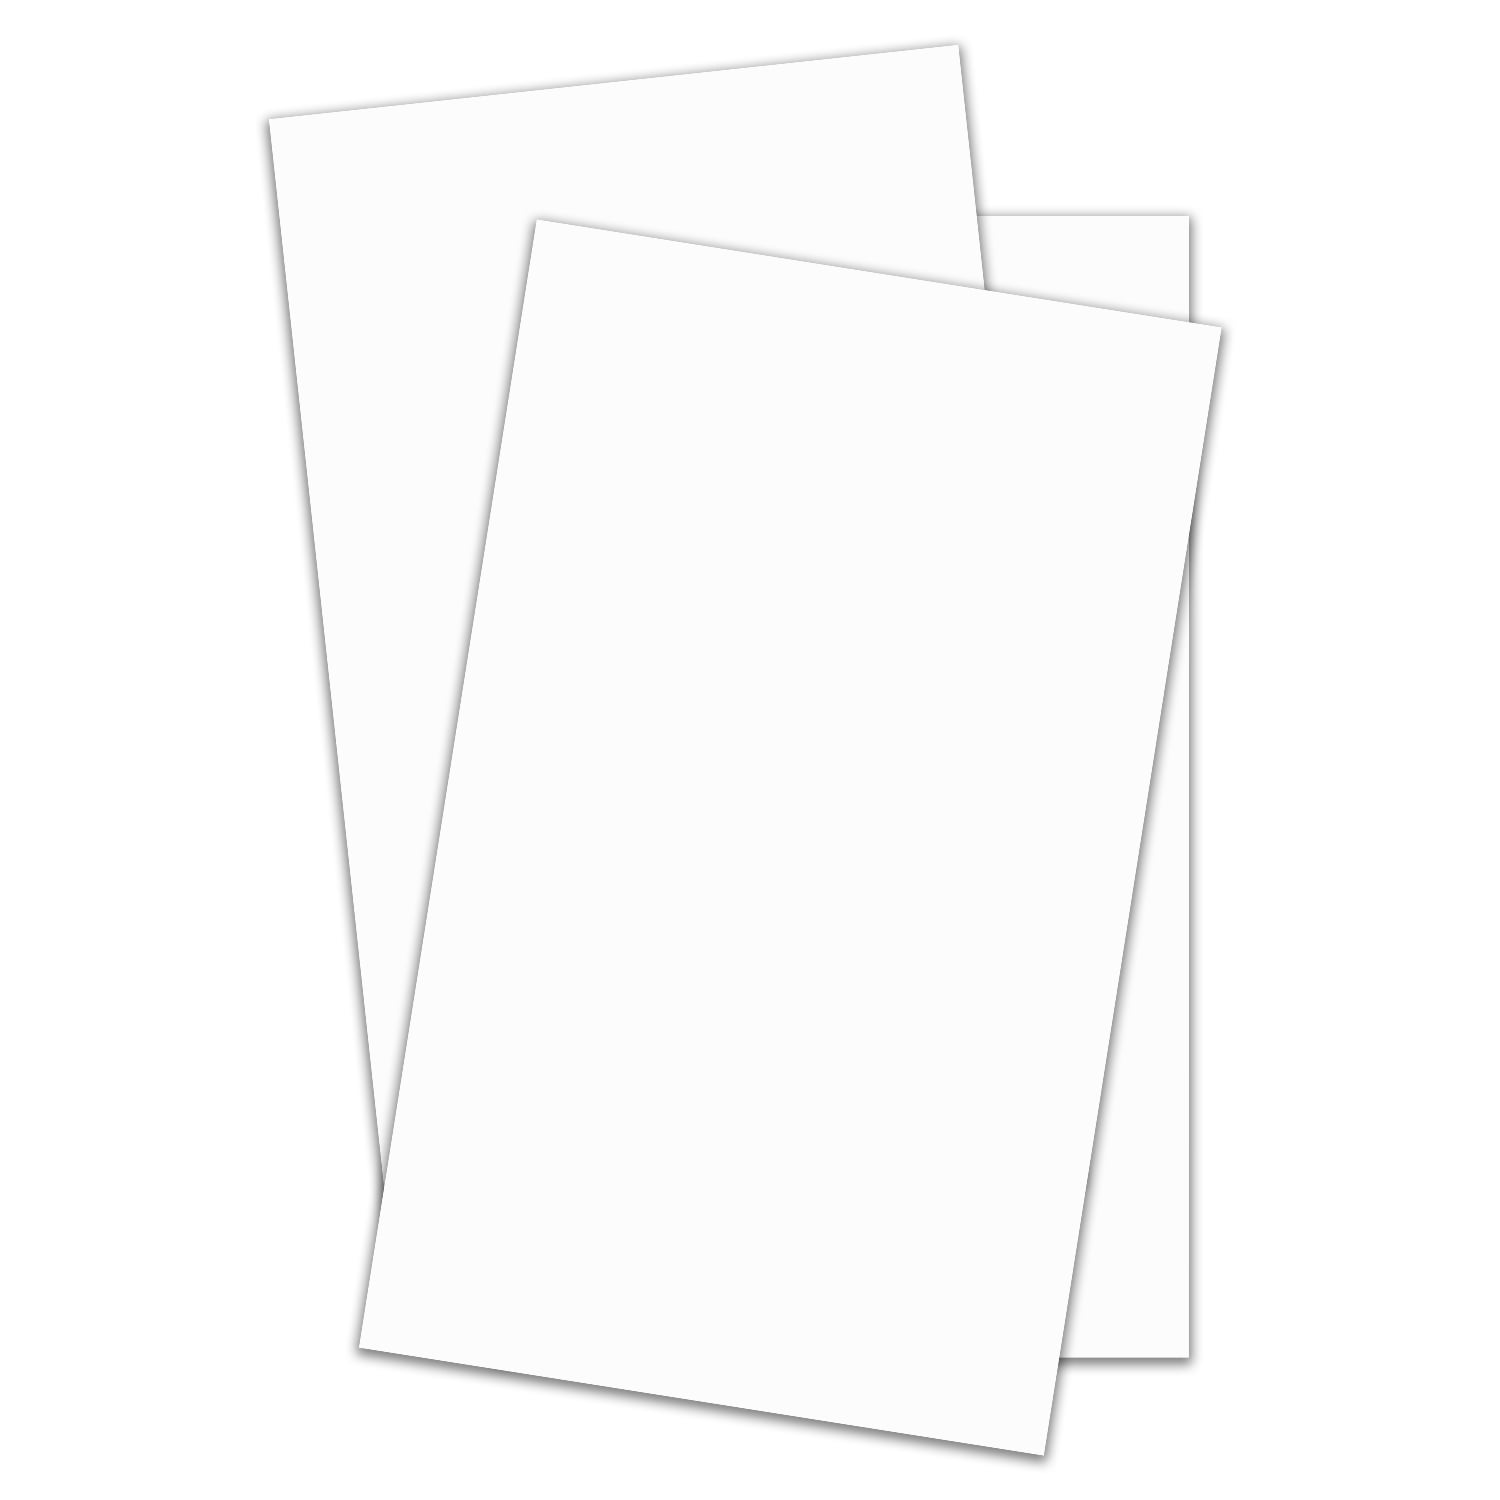  JAM PAPER Parchment 65lb Cardstock - 8.5 x 11 Coverstock - 176  GSM - Natural Recycled - 50 Sheets/Pack : Paper Stationery Envelope Seals :  Arts, Crafts & Sewing